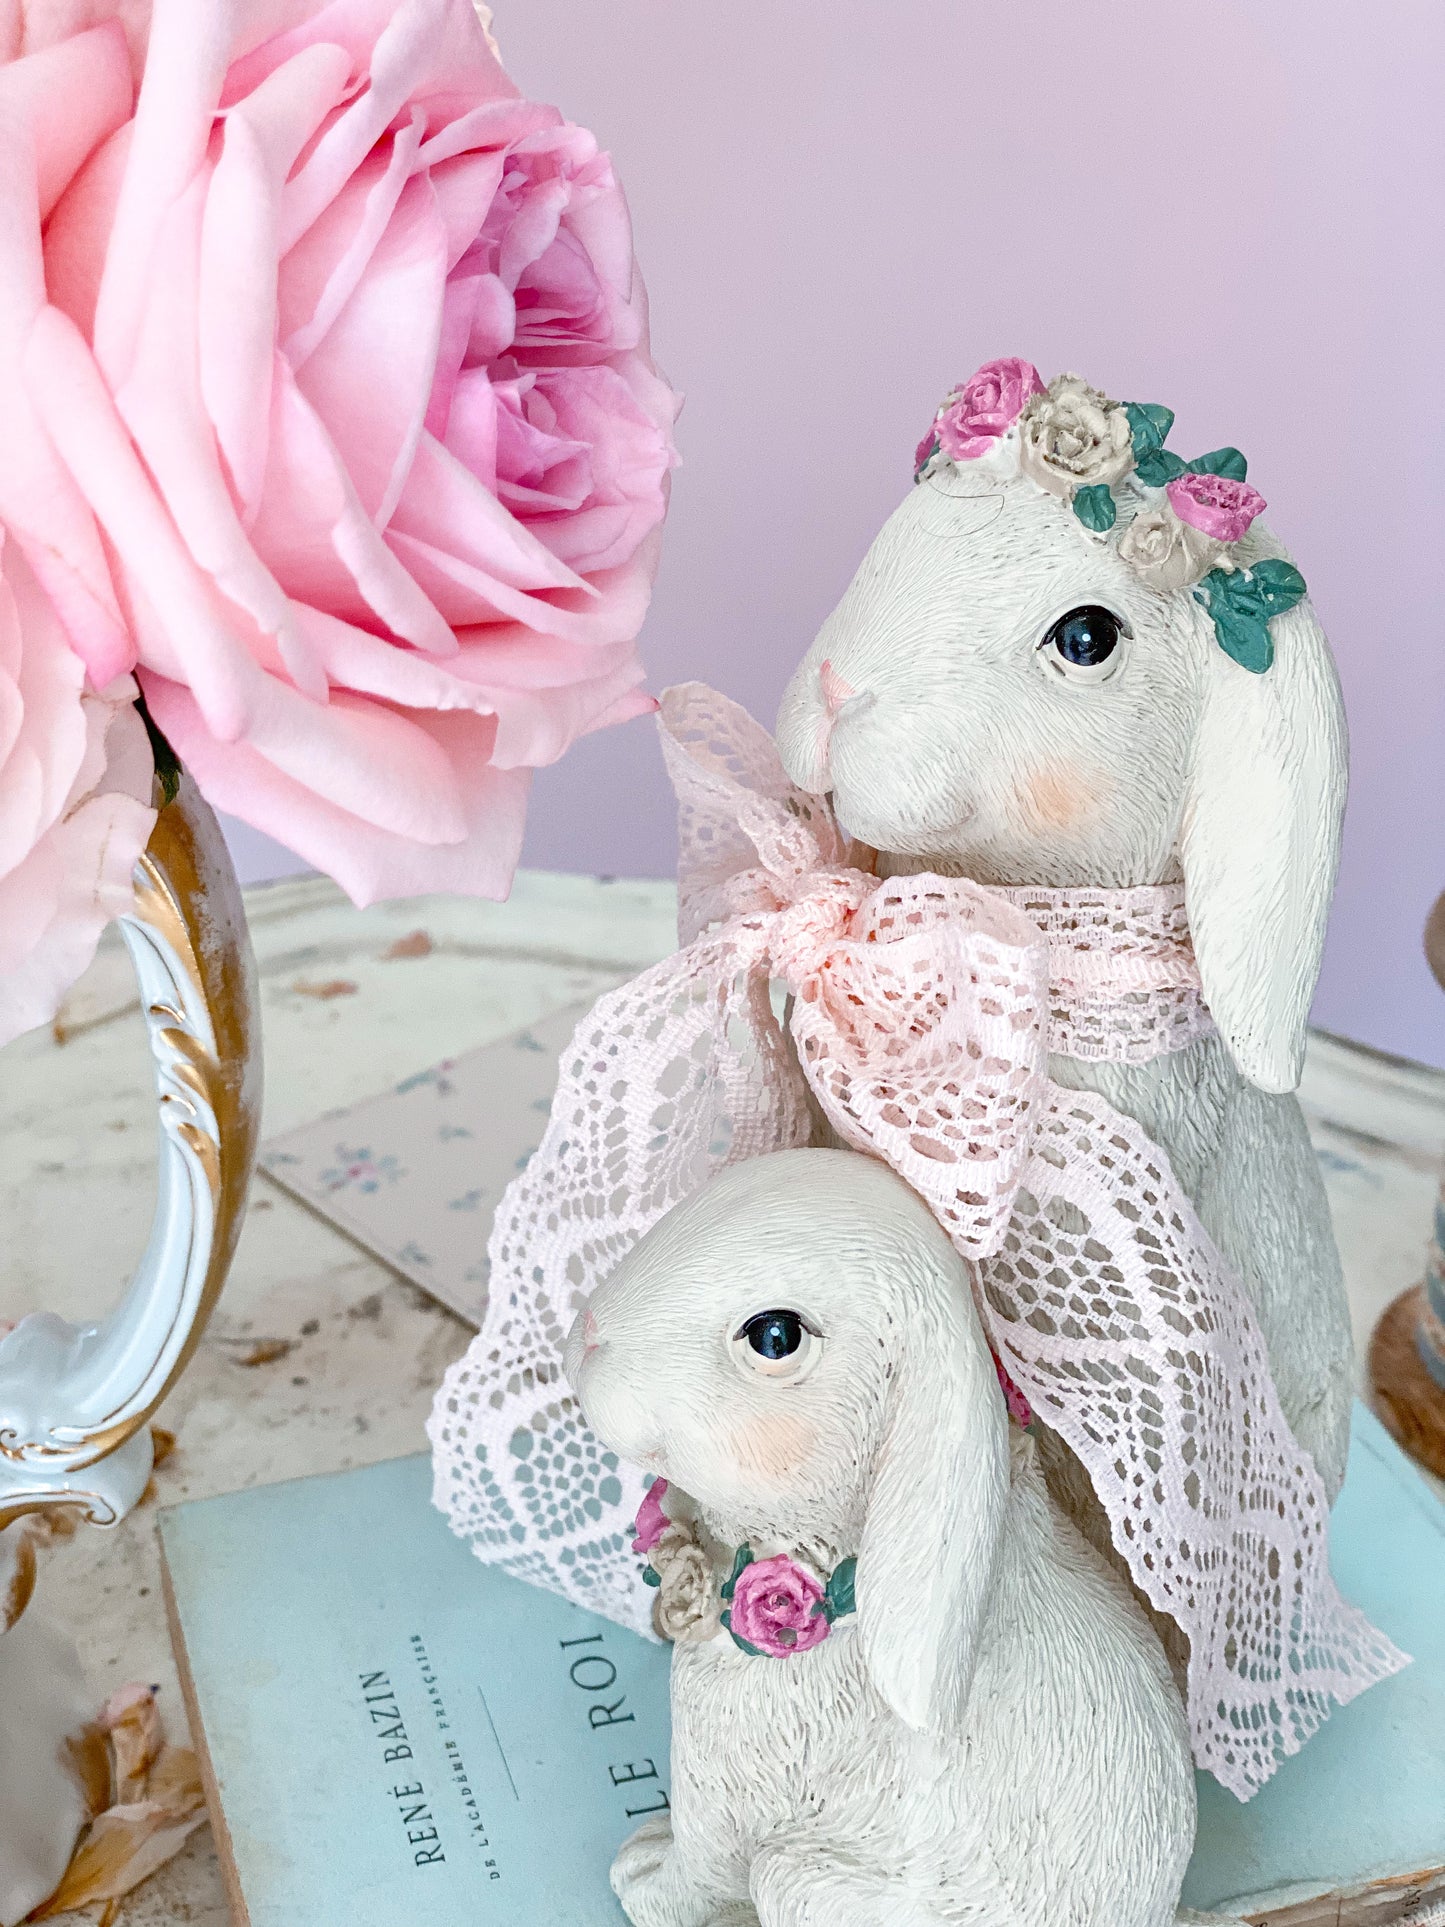 Mama & Baby Easter Bunny with Pastel Pink Floral Headbands Figurine